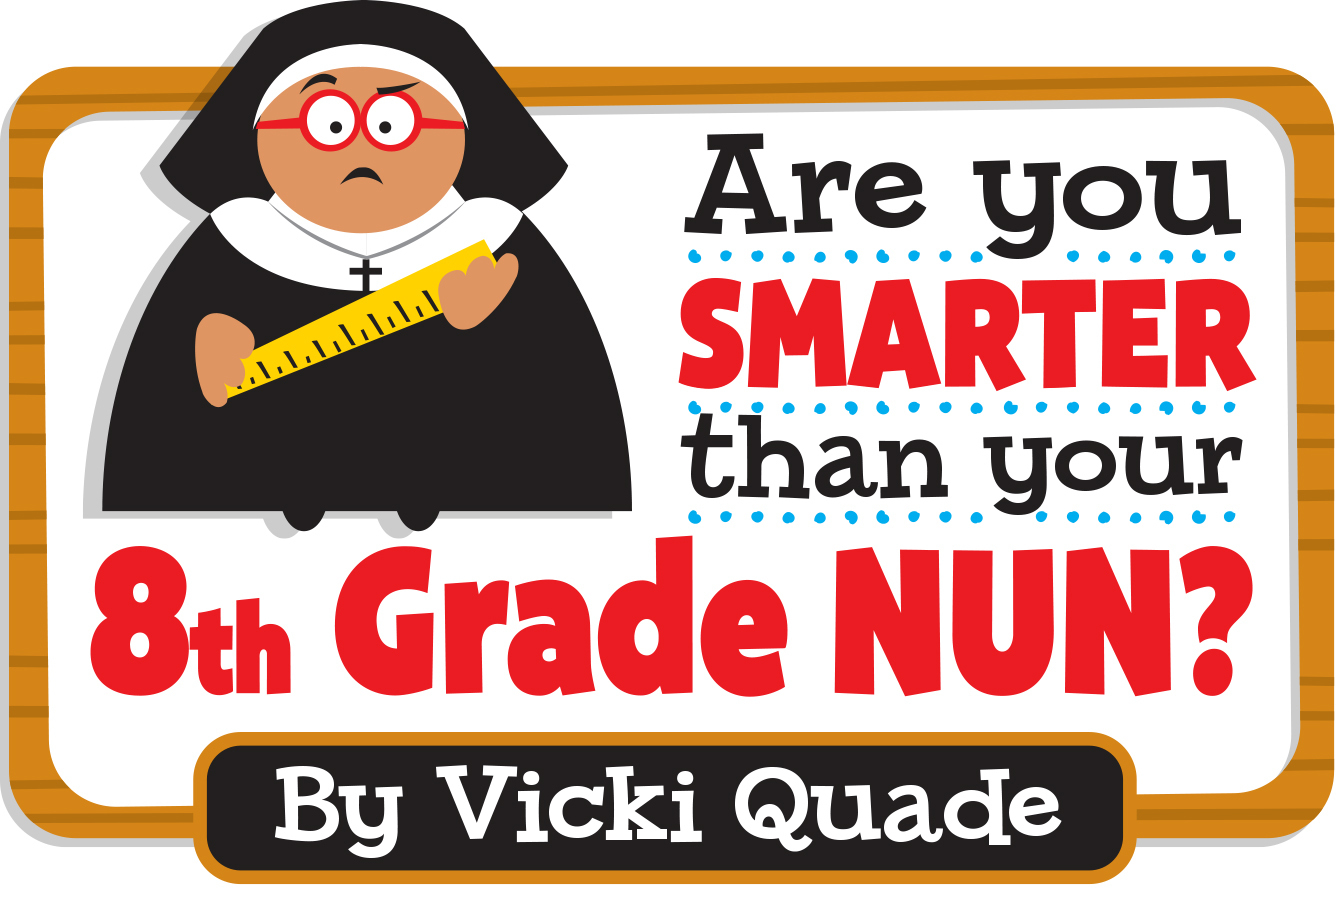 Are You Smarter Than Your 8th Grade Nun?, Chicago, Illinois, United States